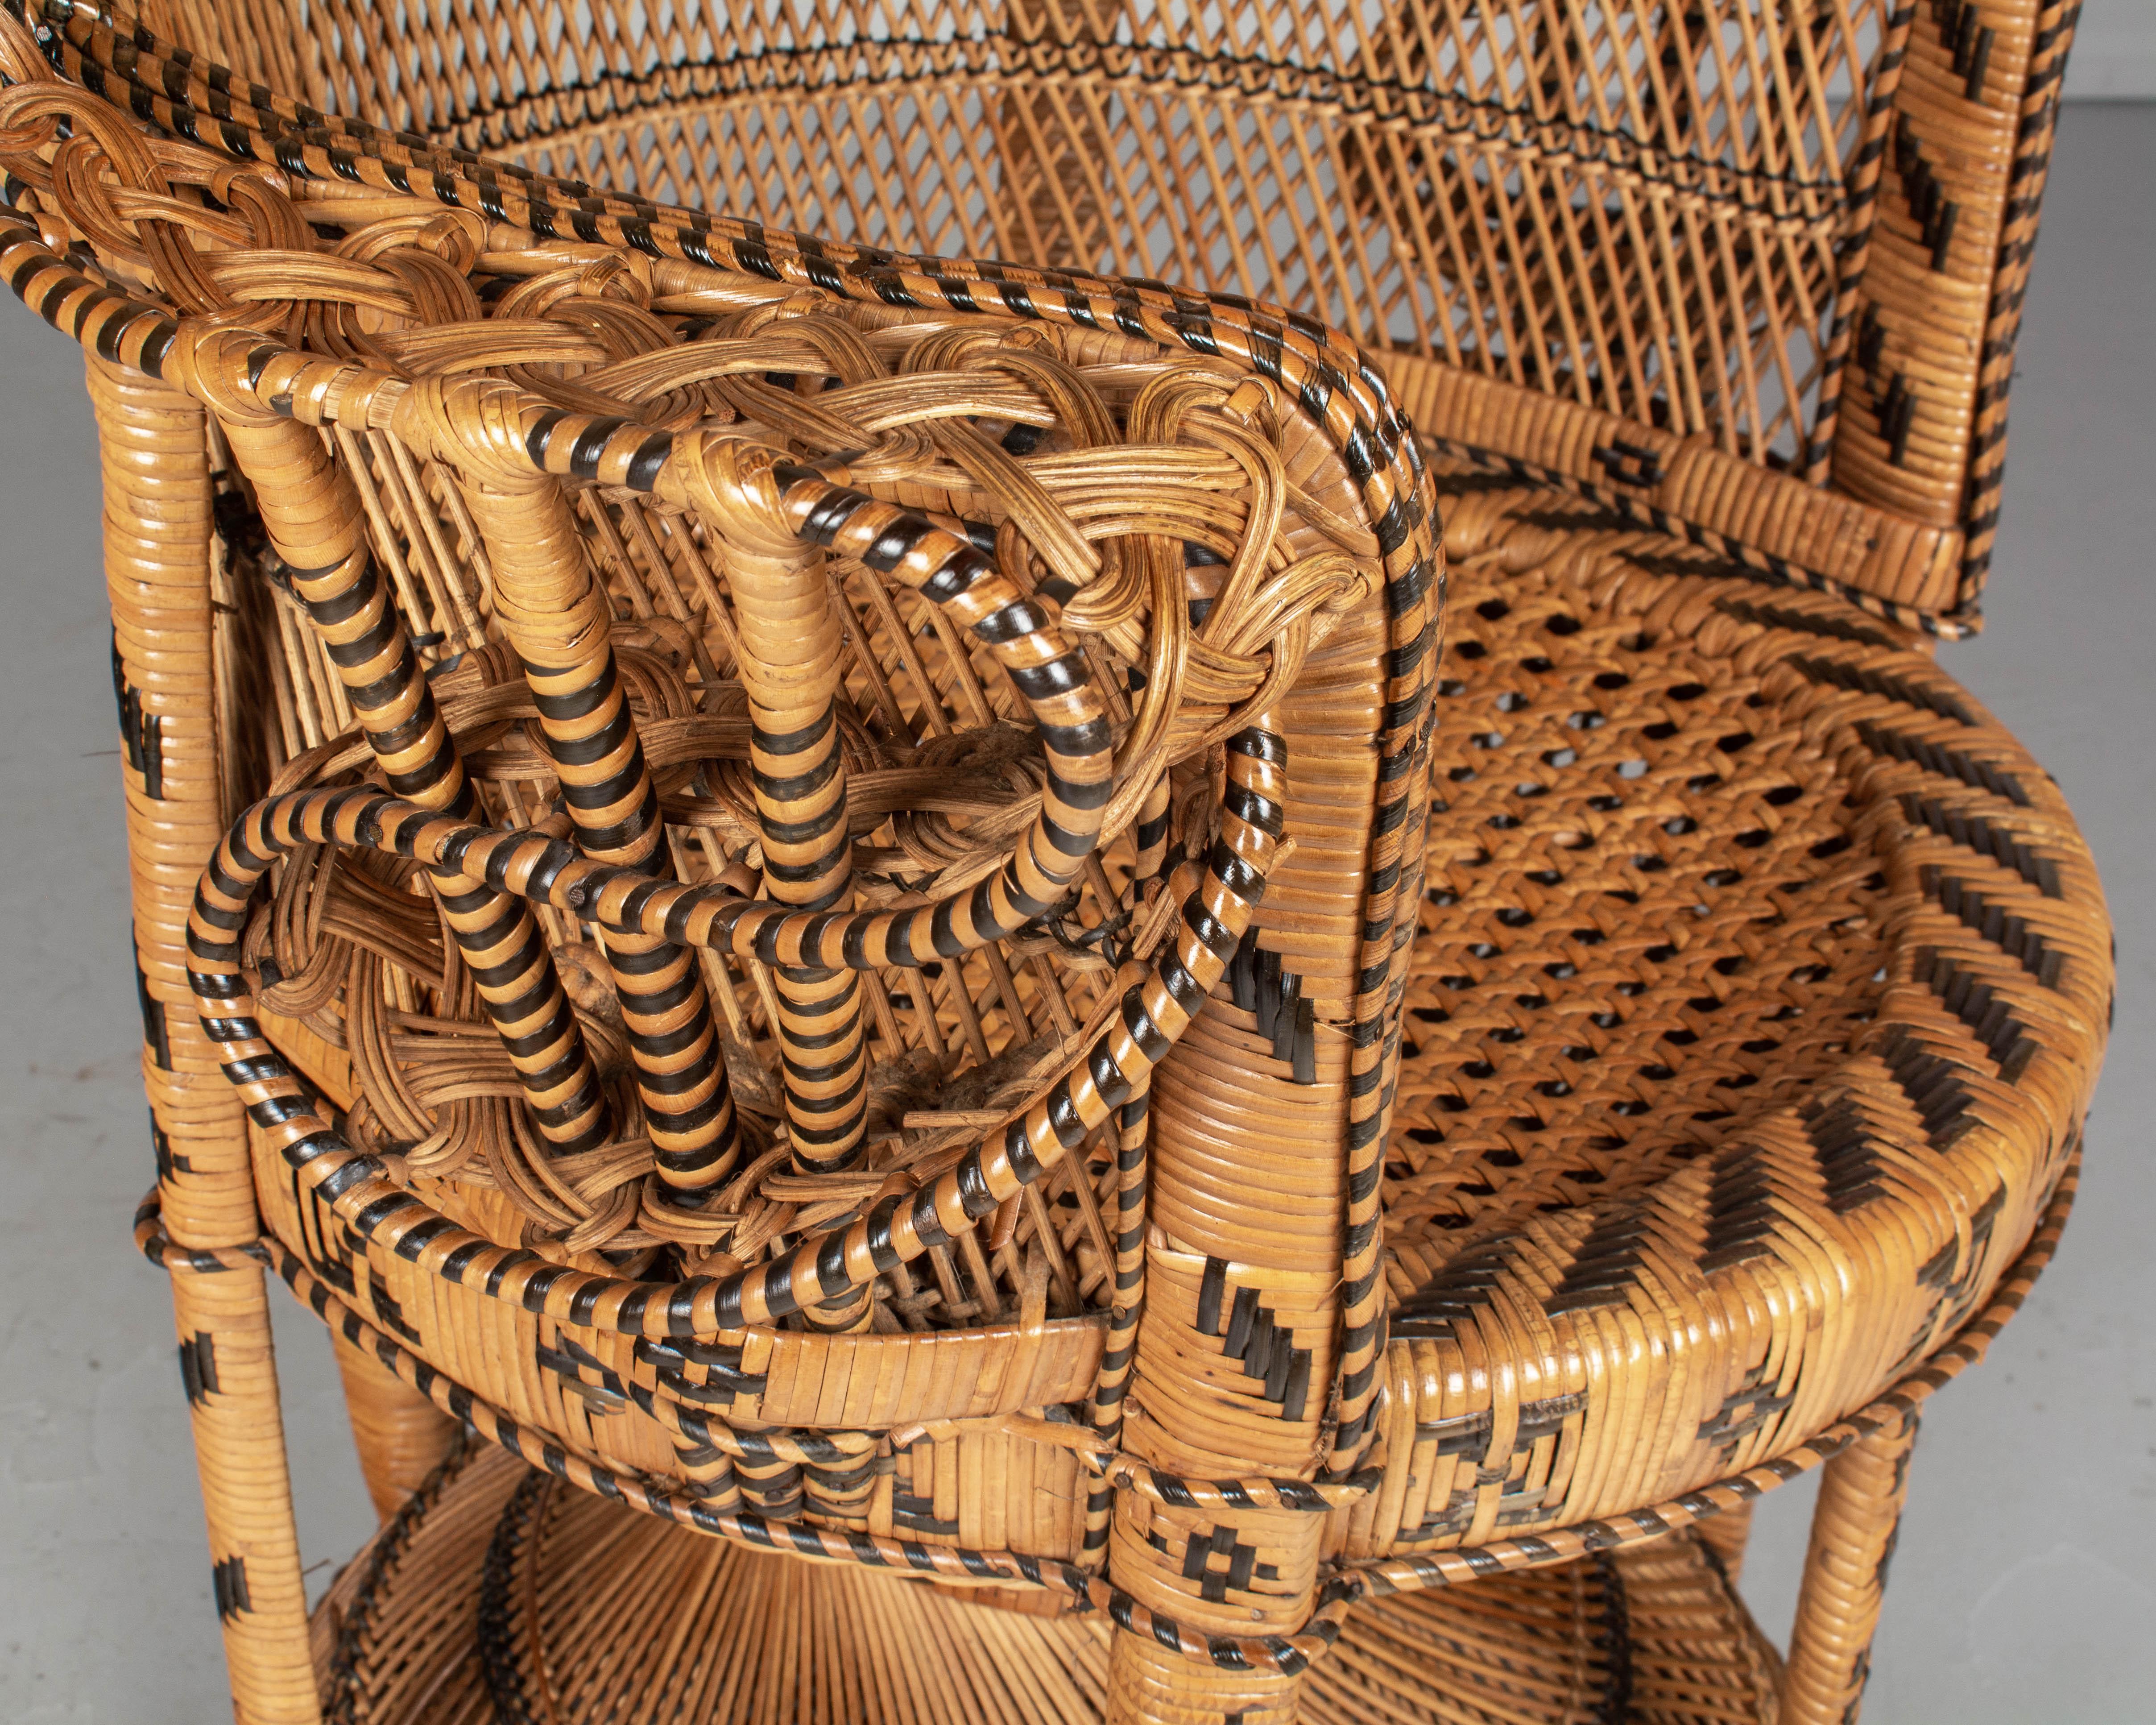 20th Century Vintage French Emmanuelle Rattan Peacock Fan Chair